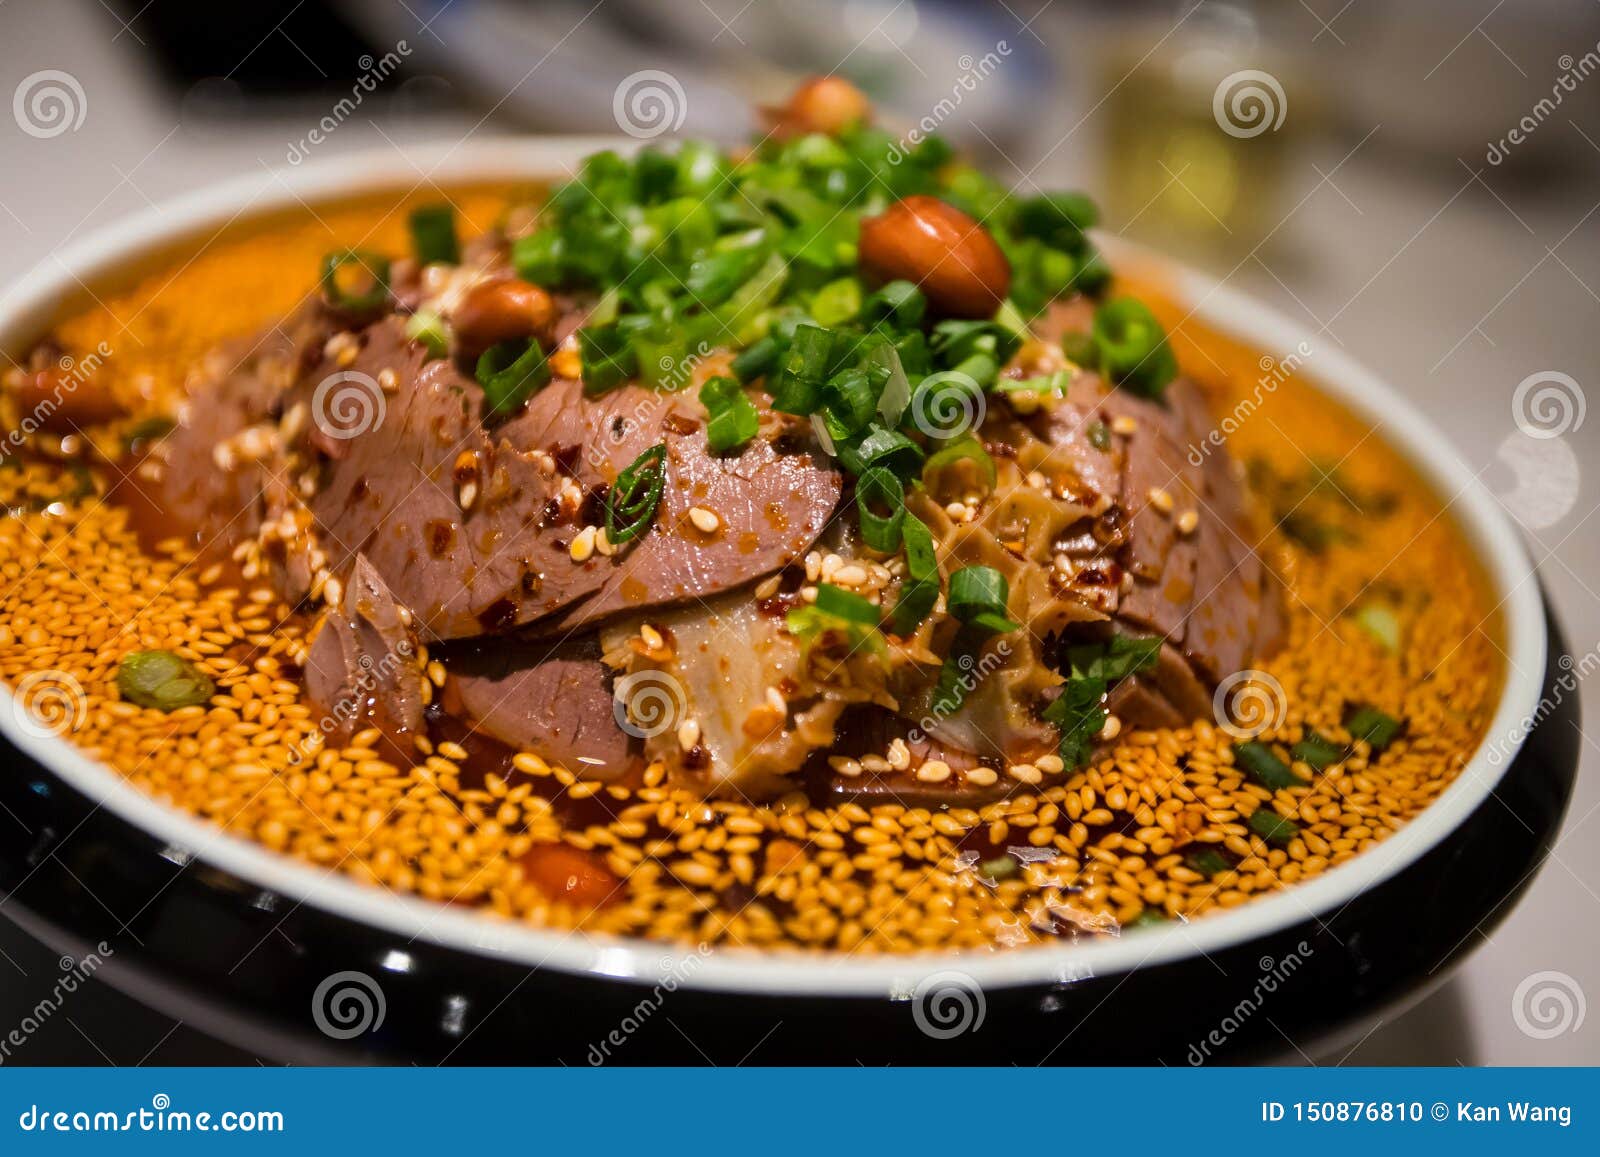 Sliced Beef And Ox Tongue In Chili Sauce Stock Photo Image Of Chili China 150876810